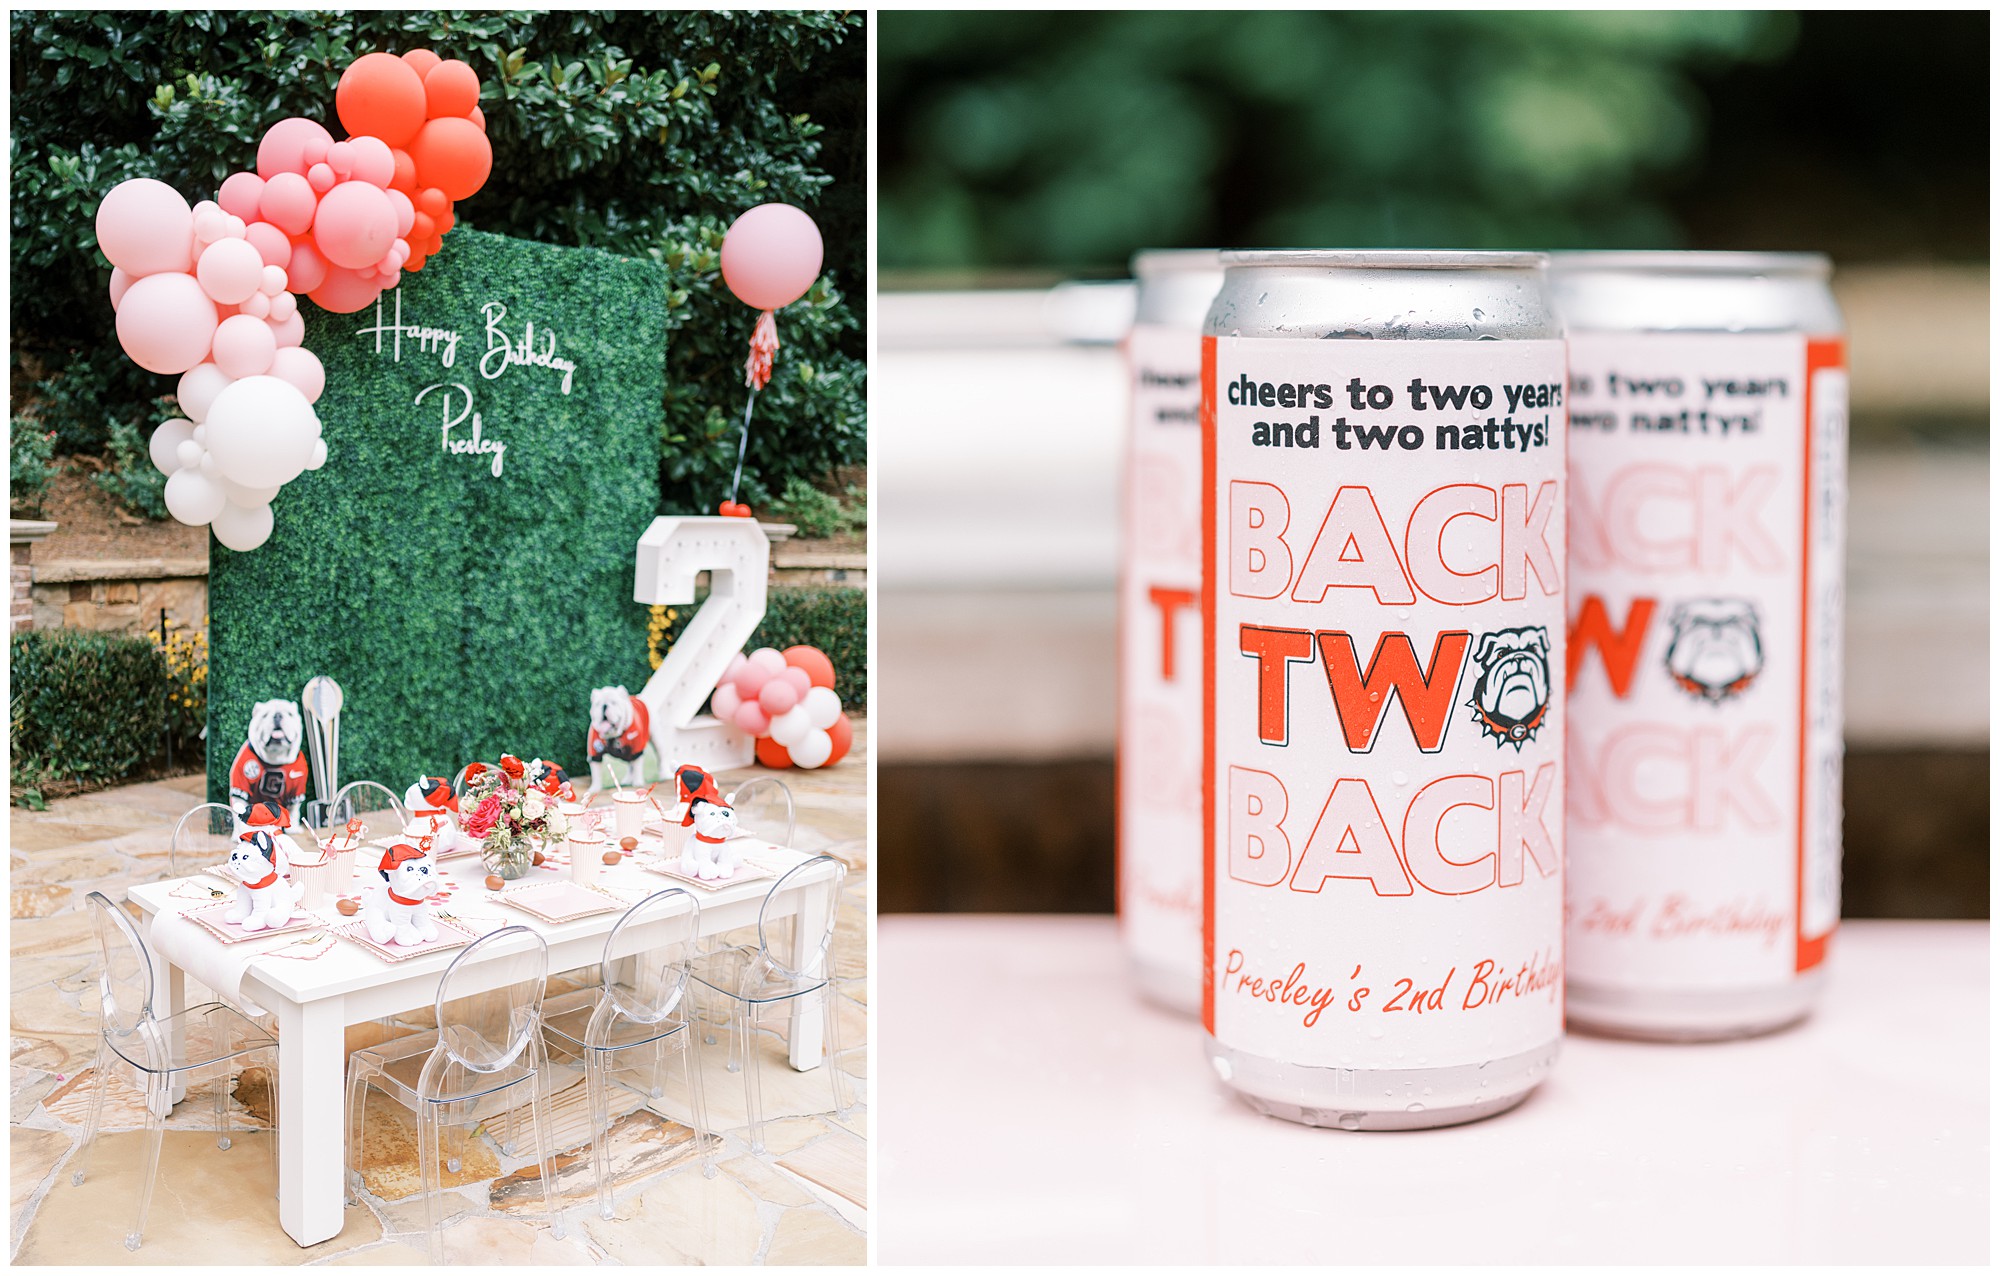 Photos of a UGA themed birthday party, one is a close up of drink cans reading back to back and the other is a children's table set with plates and toy bulldgos.